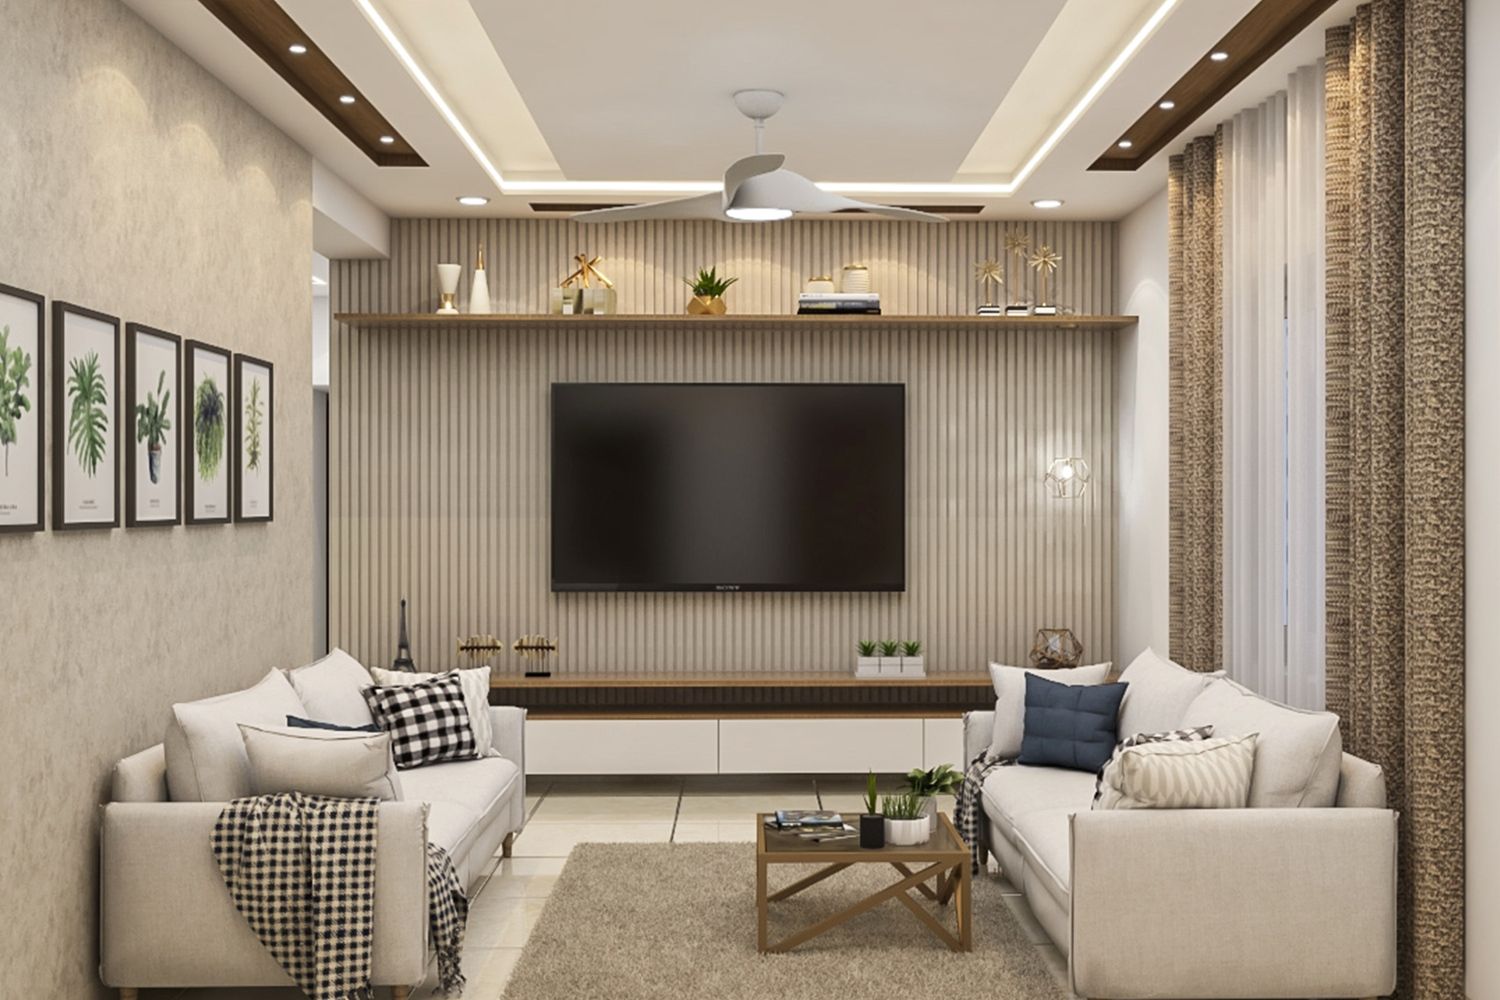 Modern Living Room Design With White Sofa And Beige-Toned TV Wall Panel